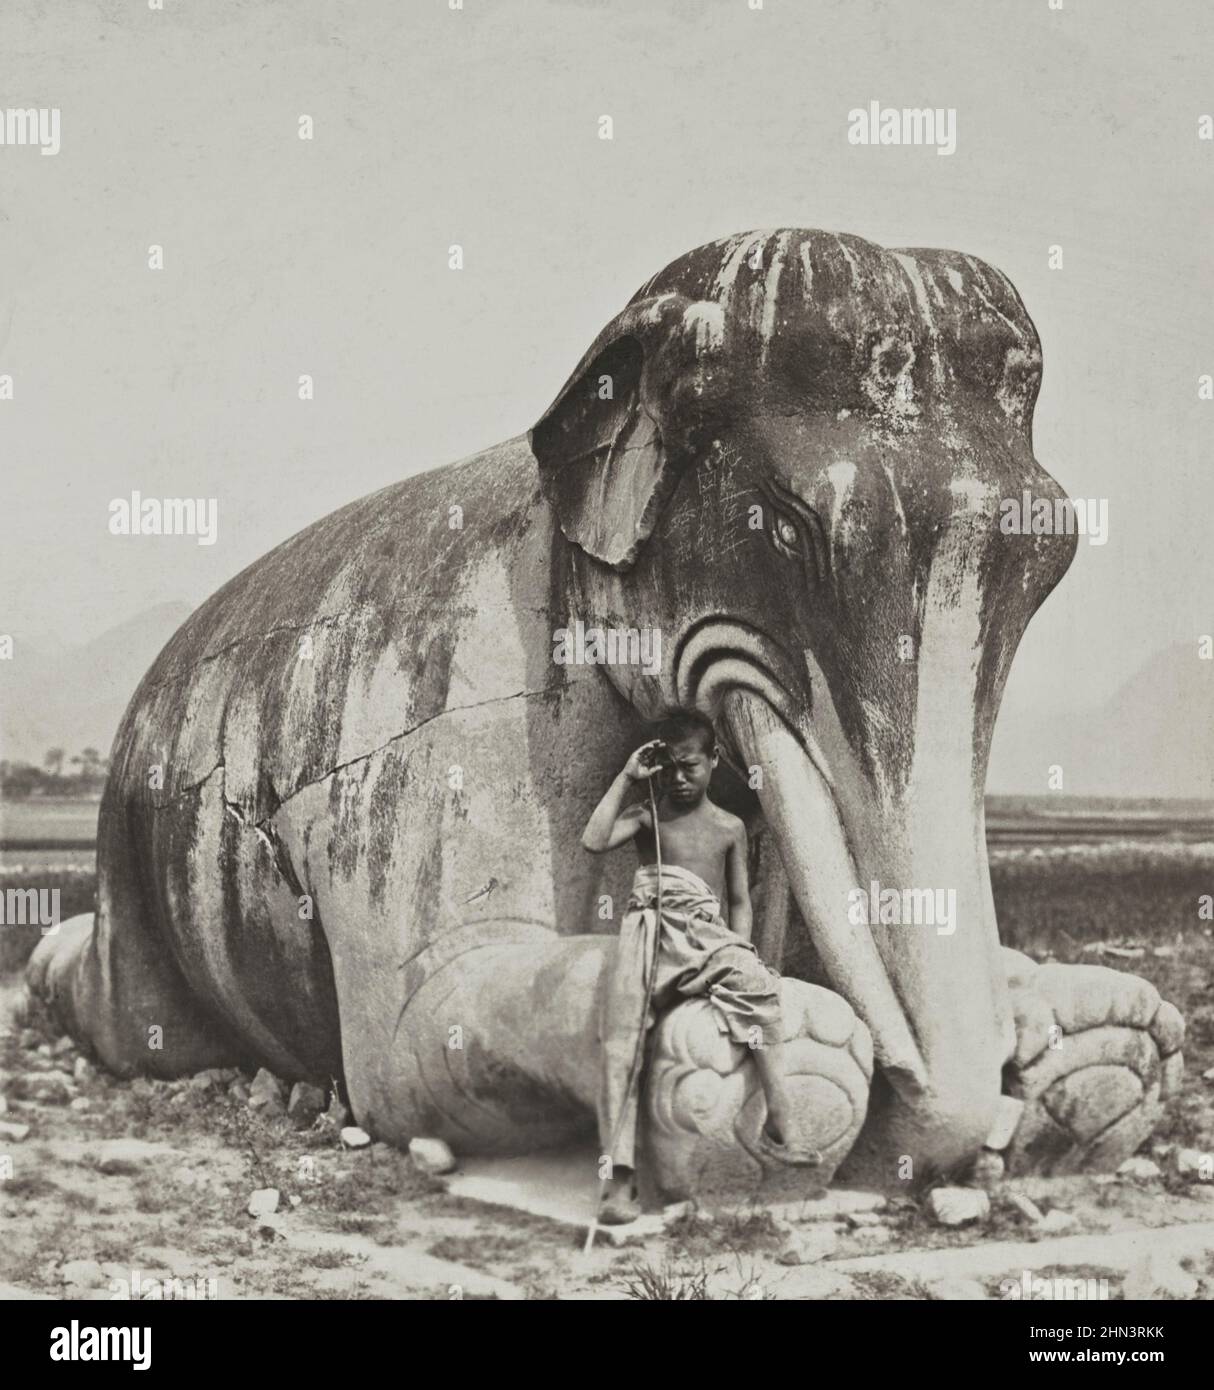 Vintage photo of young Chinese herd near ancient Chinese sculpture of a kneeling stone elephant. The Ming Tombs. North China. 1902 Stock Photo